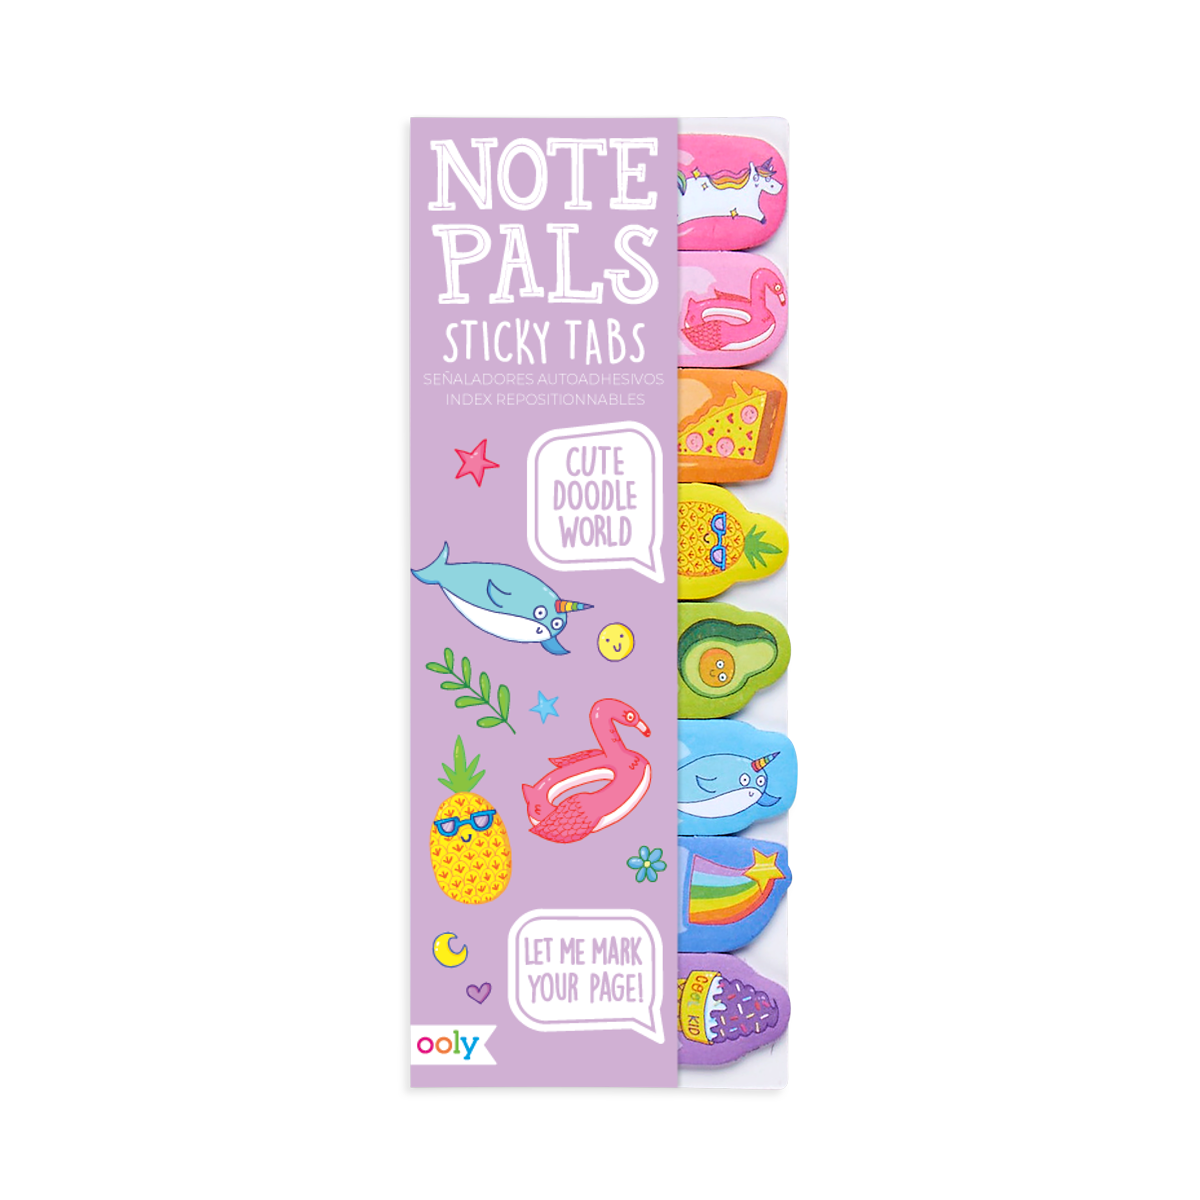 OOLY Note Pals Sticky Tabs - Cute Doodle World in packaging